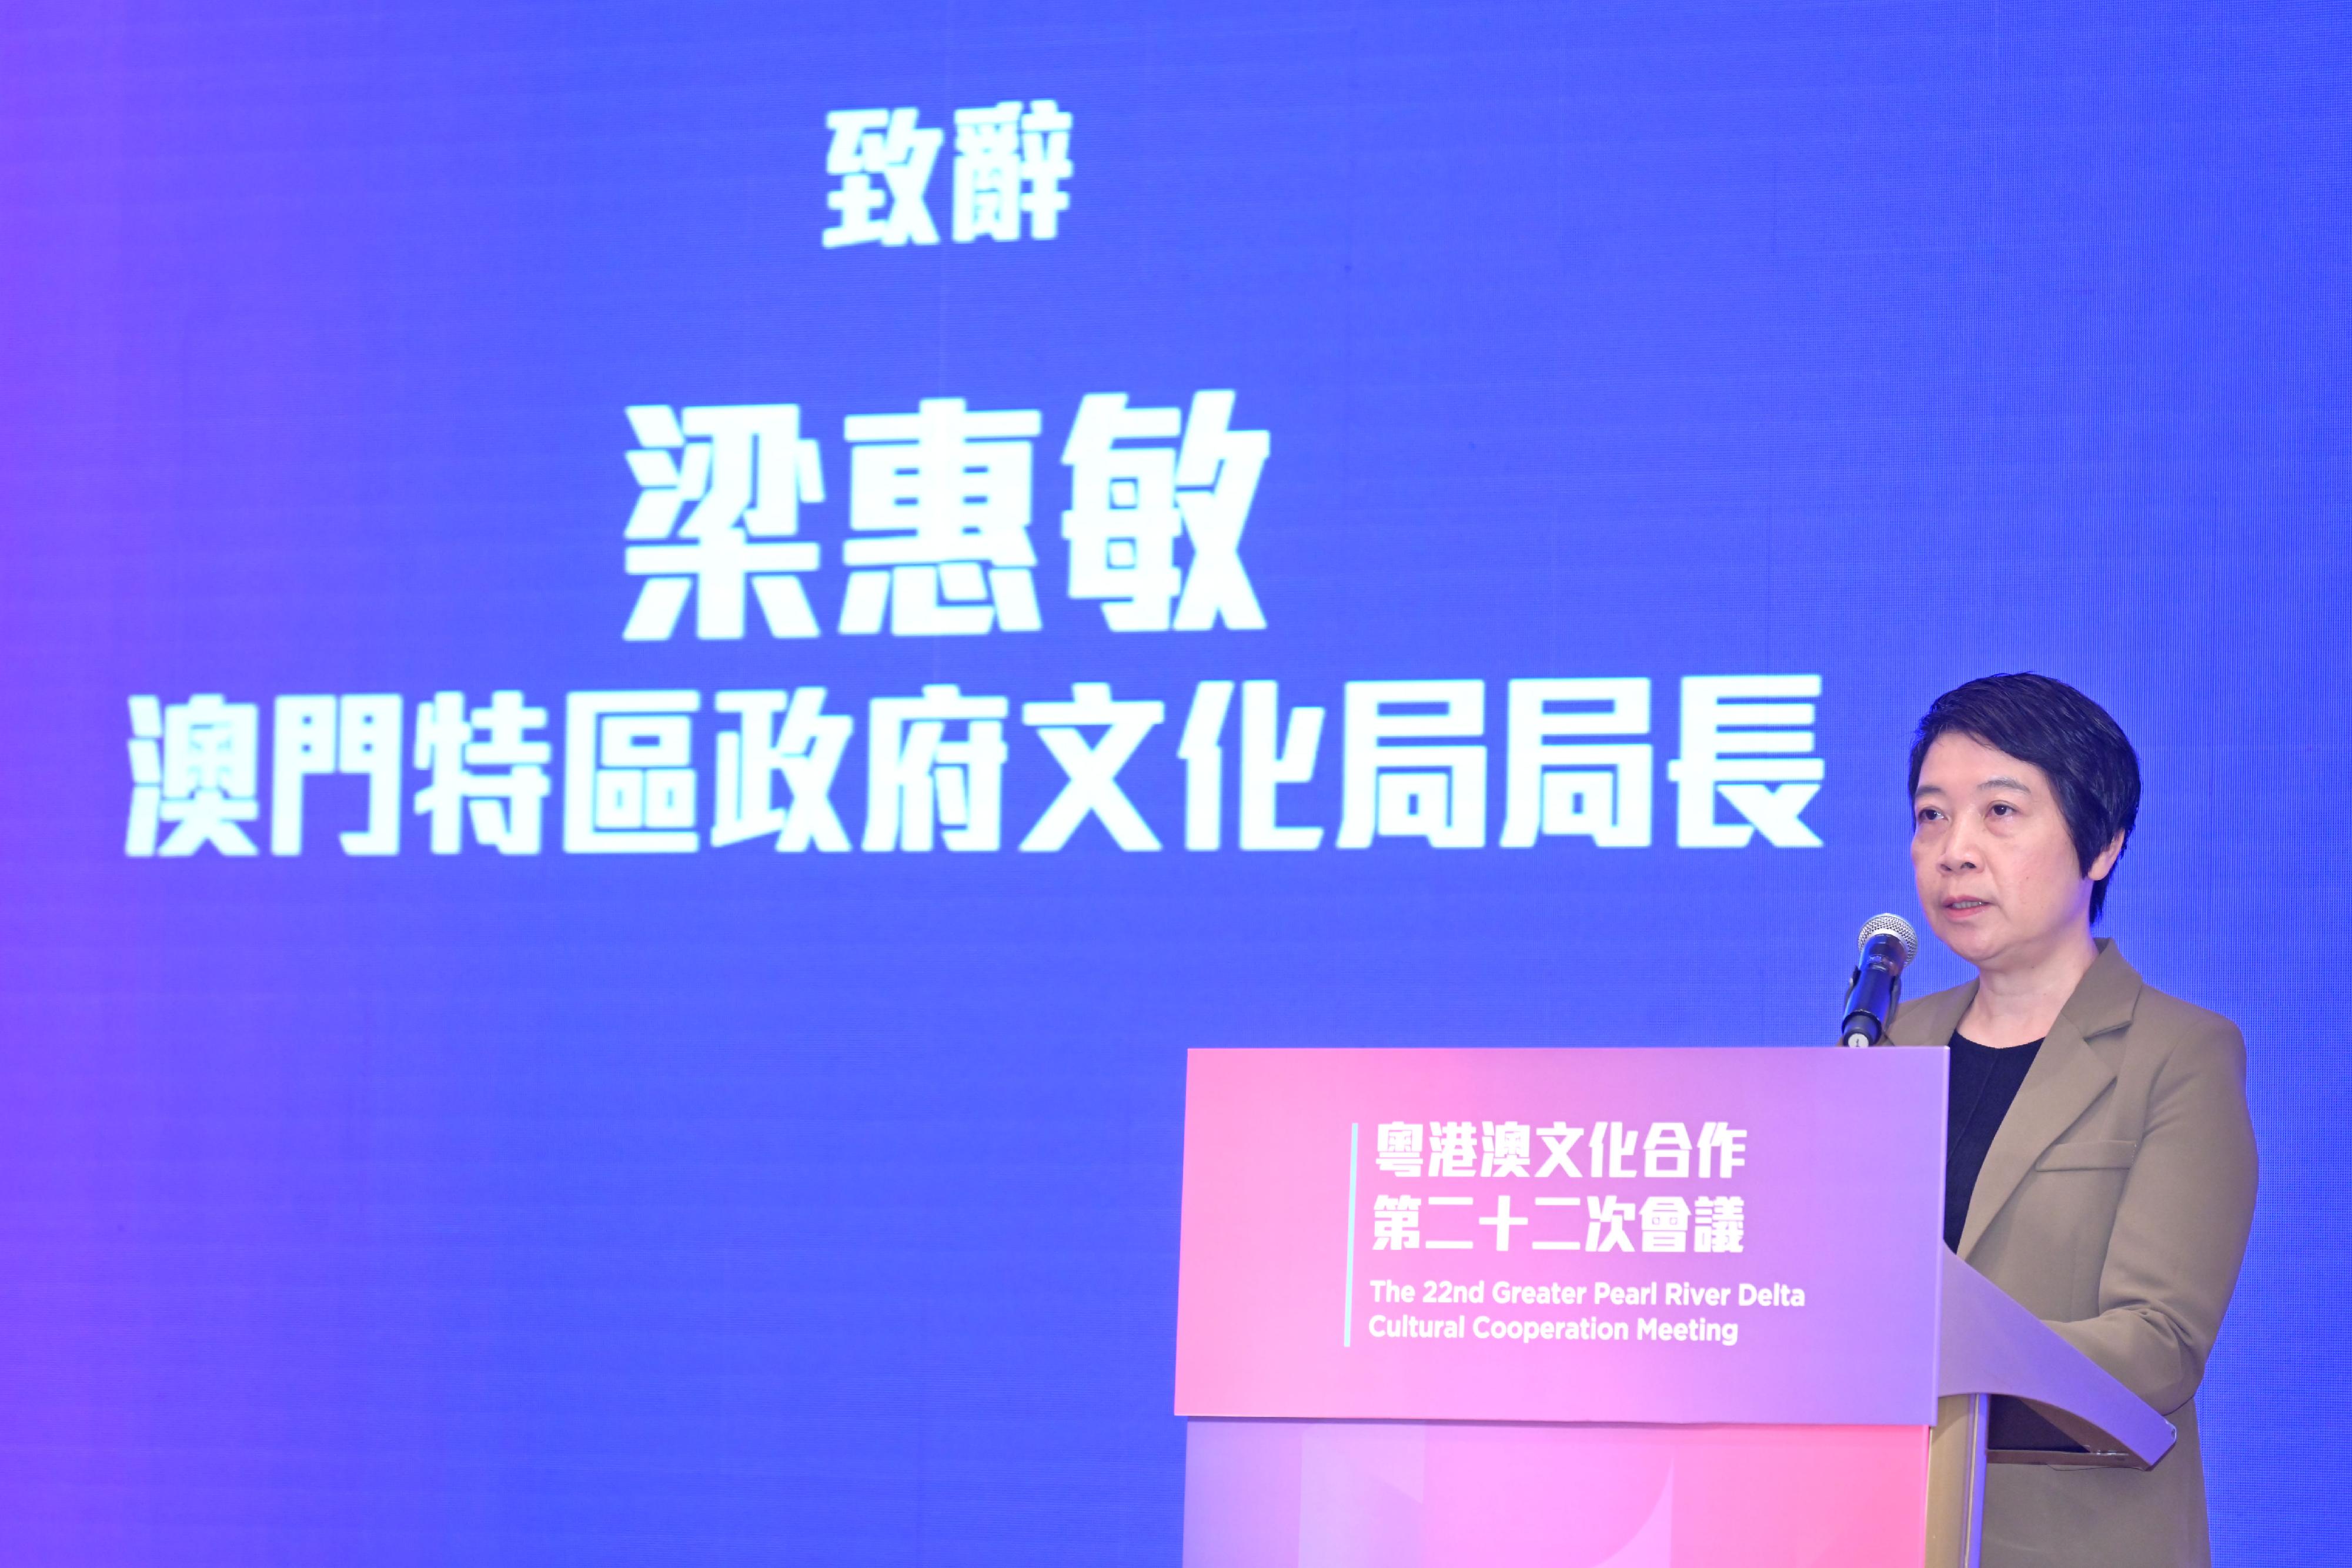 The 22nd Greater Pearl River Delta Cultural Cooperation Meeting (the Meeting), co-ordinated by the Culture, Sports and Tourism Bureau, was concluded in Hong Kong today (June 6). Photo shows the Director of the Cultural Affairs Bureau of the Macao Special Administrative Region, Ms Leong Wai-man, delivering a speech at the Meeting today.